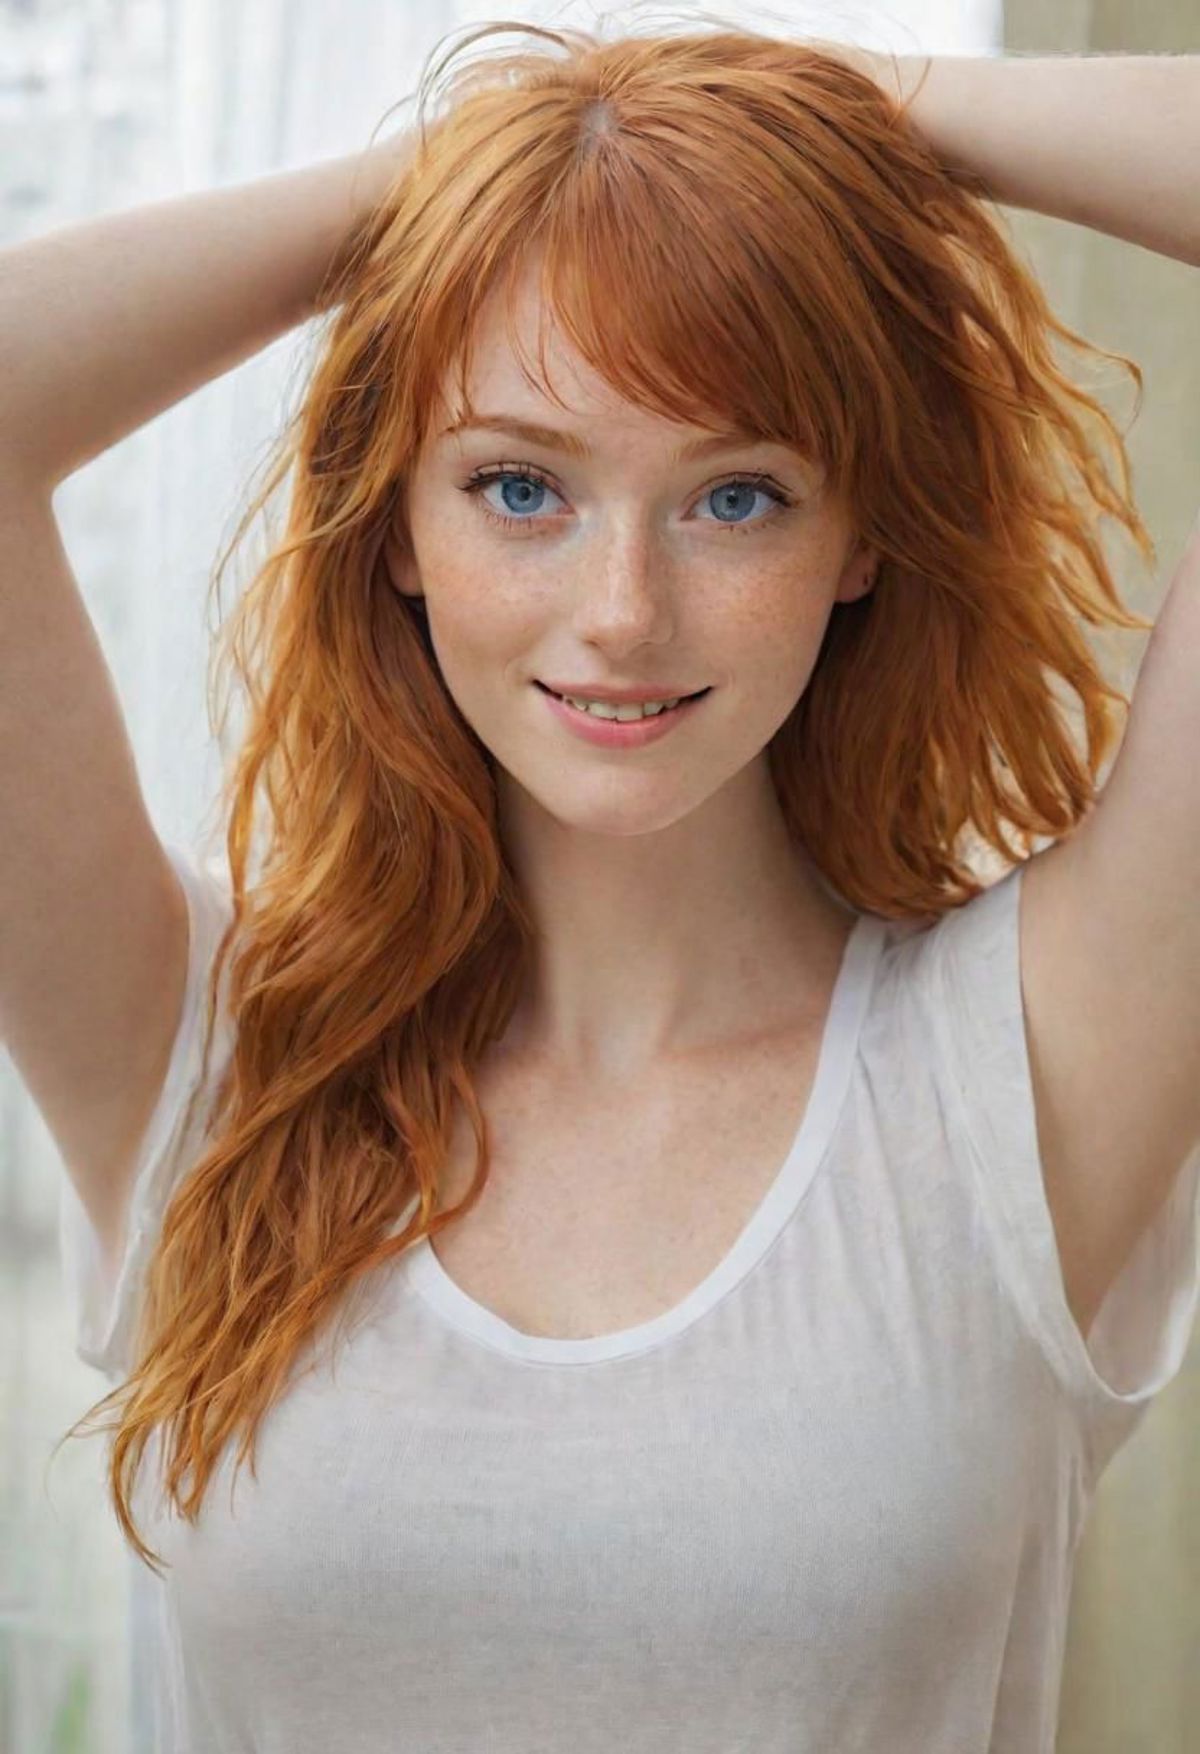 A woman with red hair and blue eyes poses for a picture.